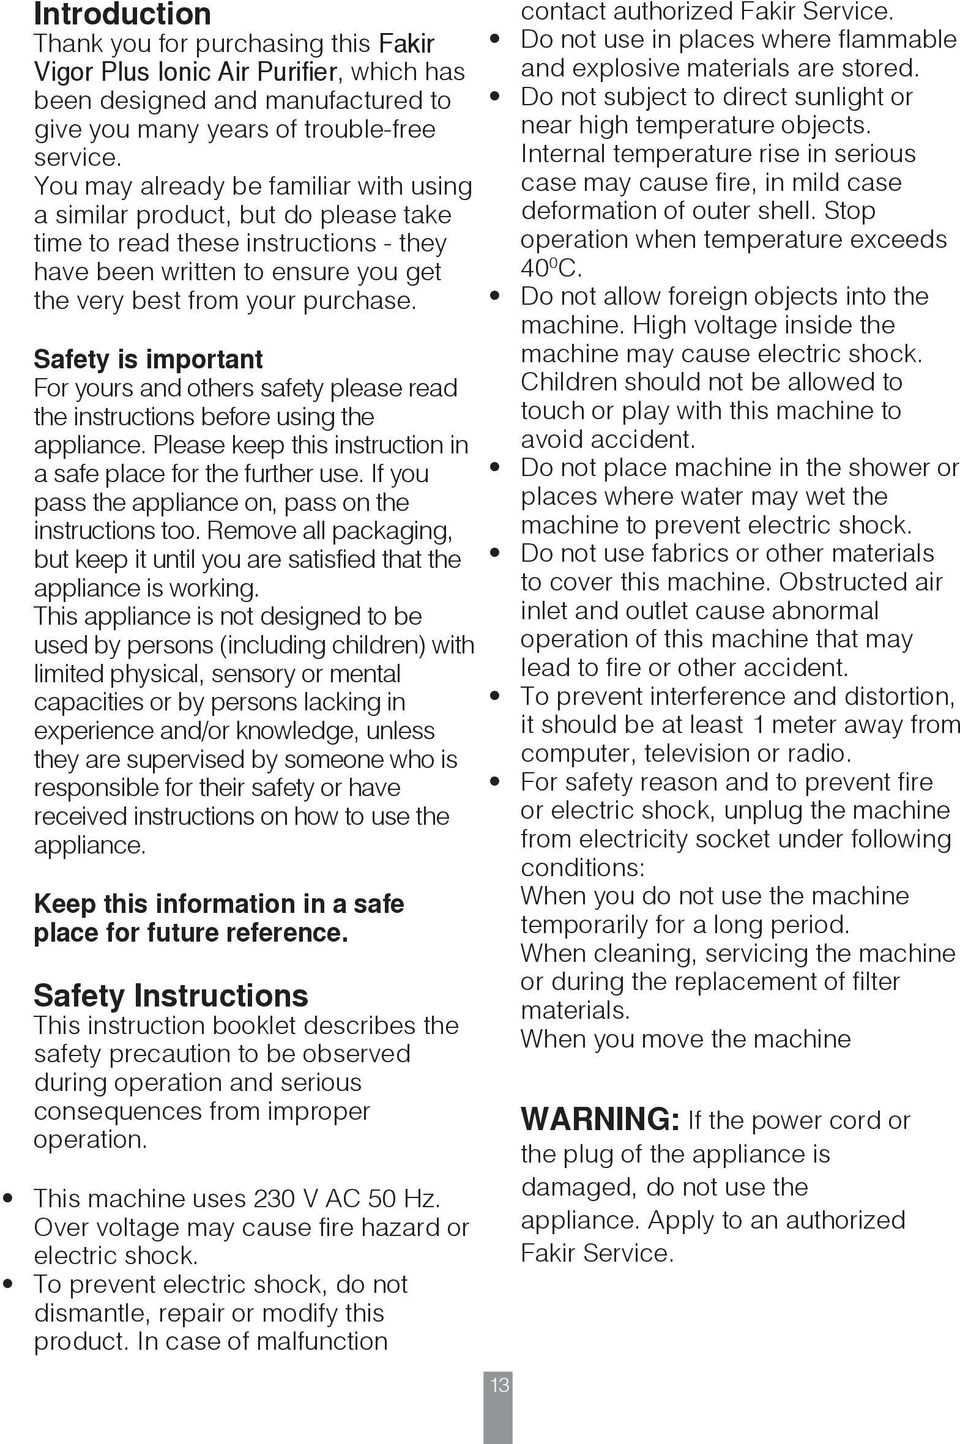 Safety is important For yours and others safety please read the instructions before using the appliance. Please keep this instruction in a safe place for the further use.